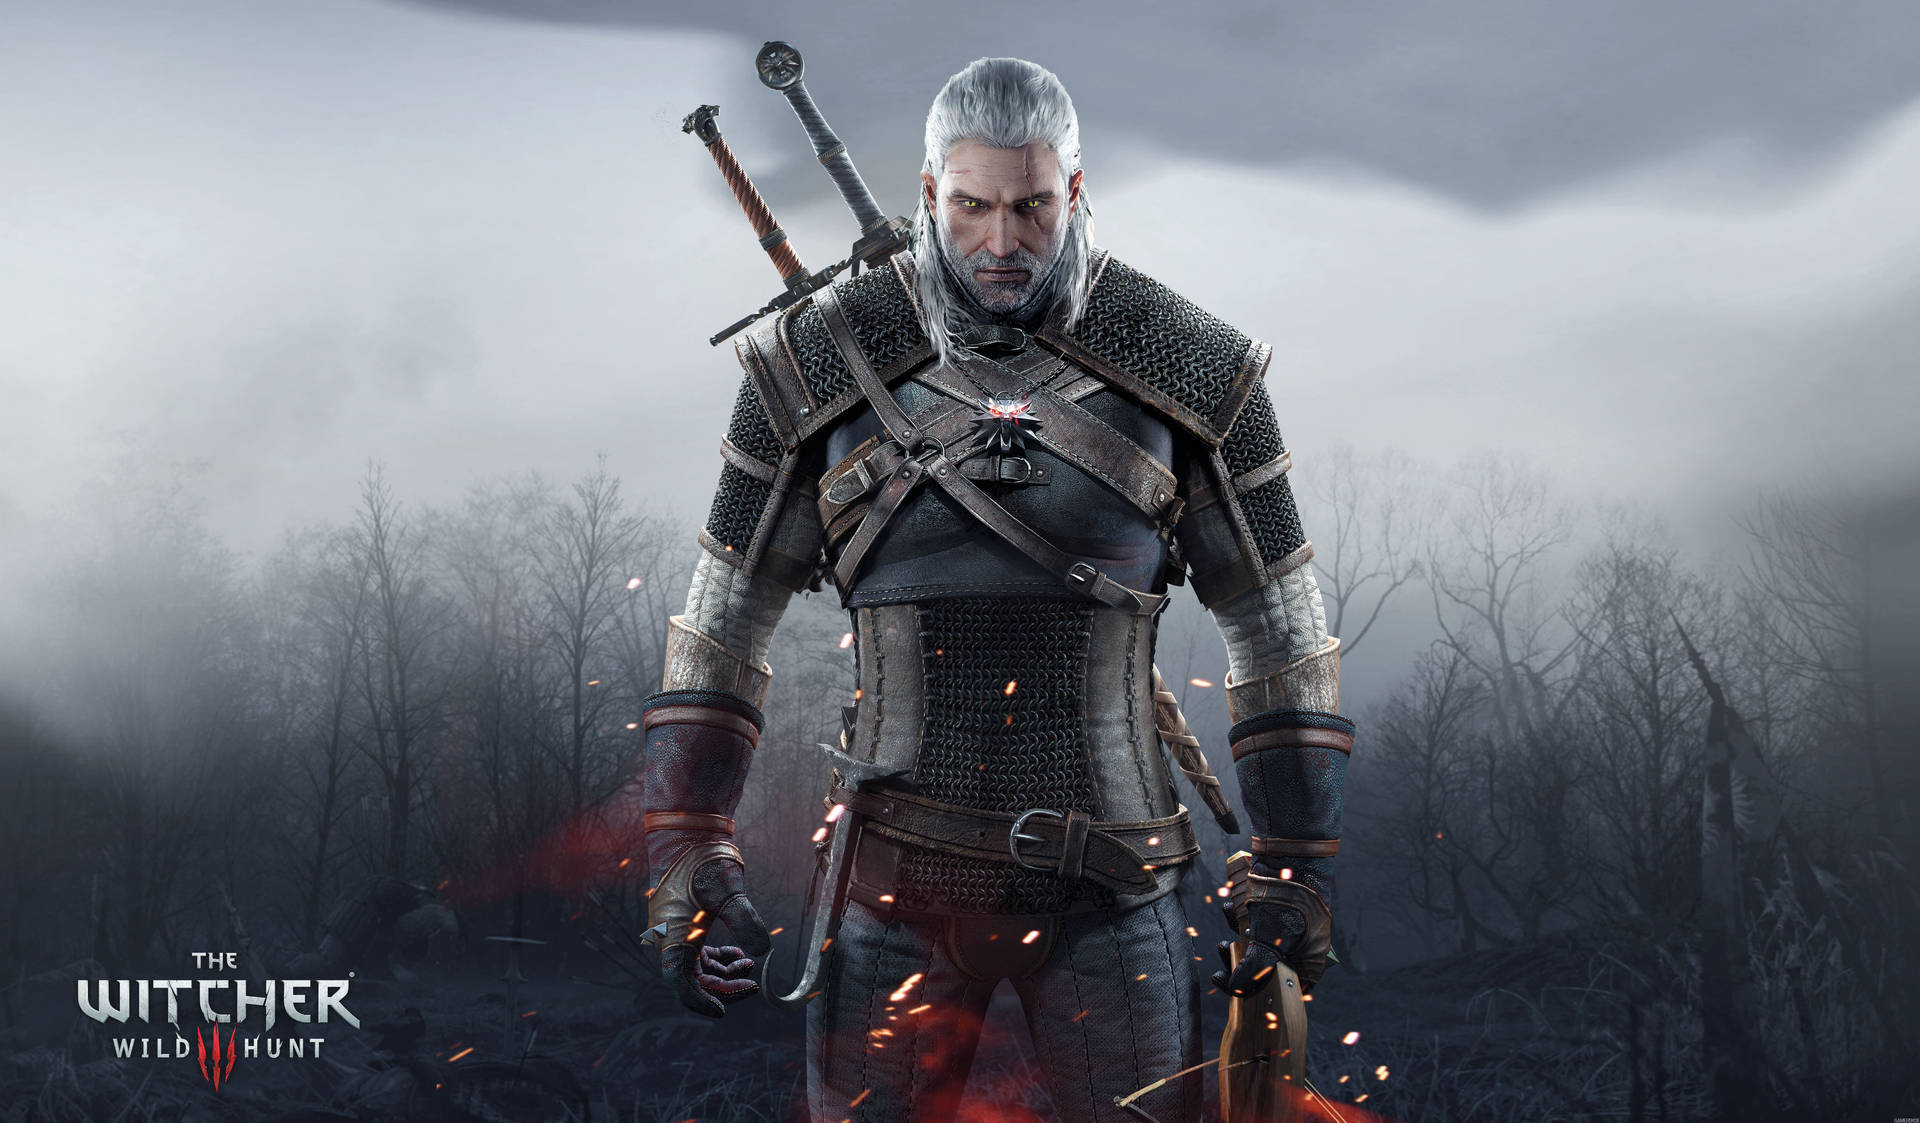 Top 999+ The Witcher Wallpaper Full HD, 4K✅Free to Use